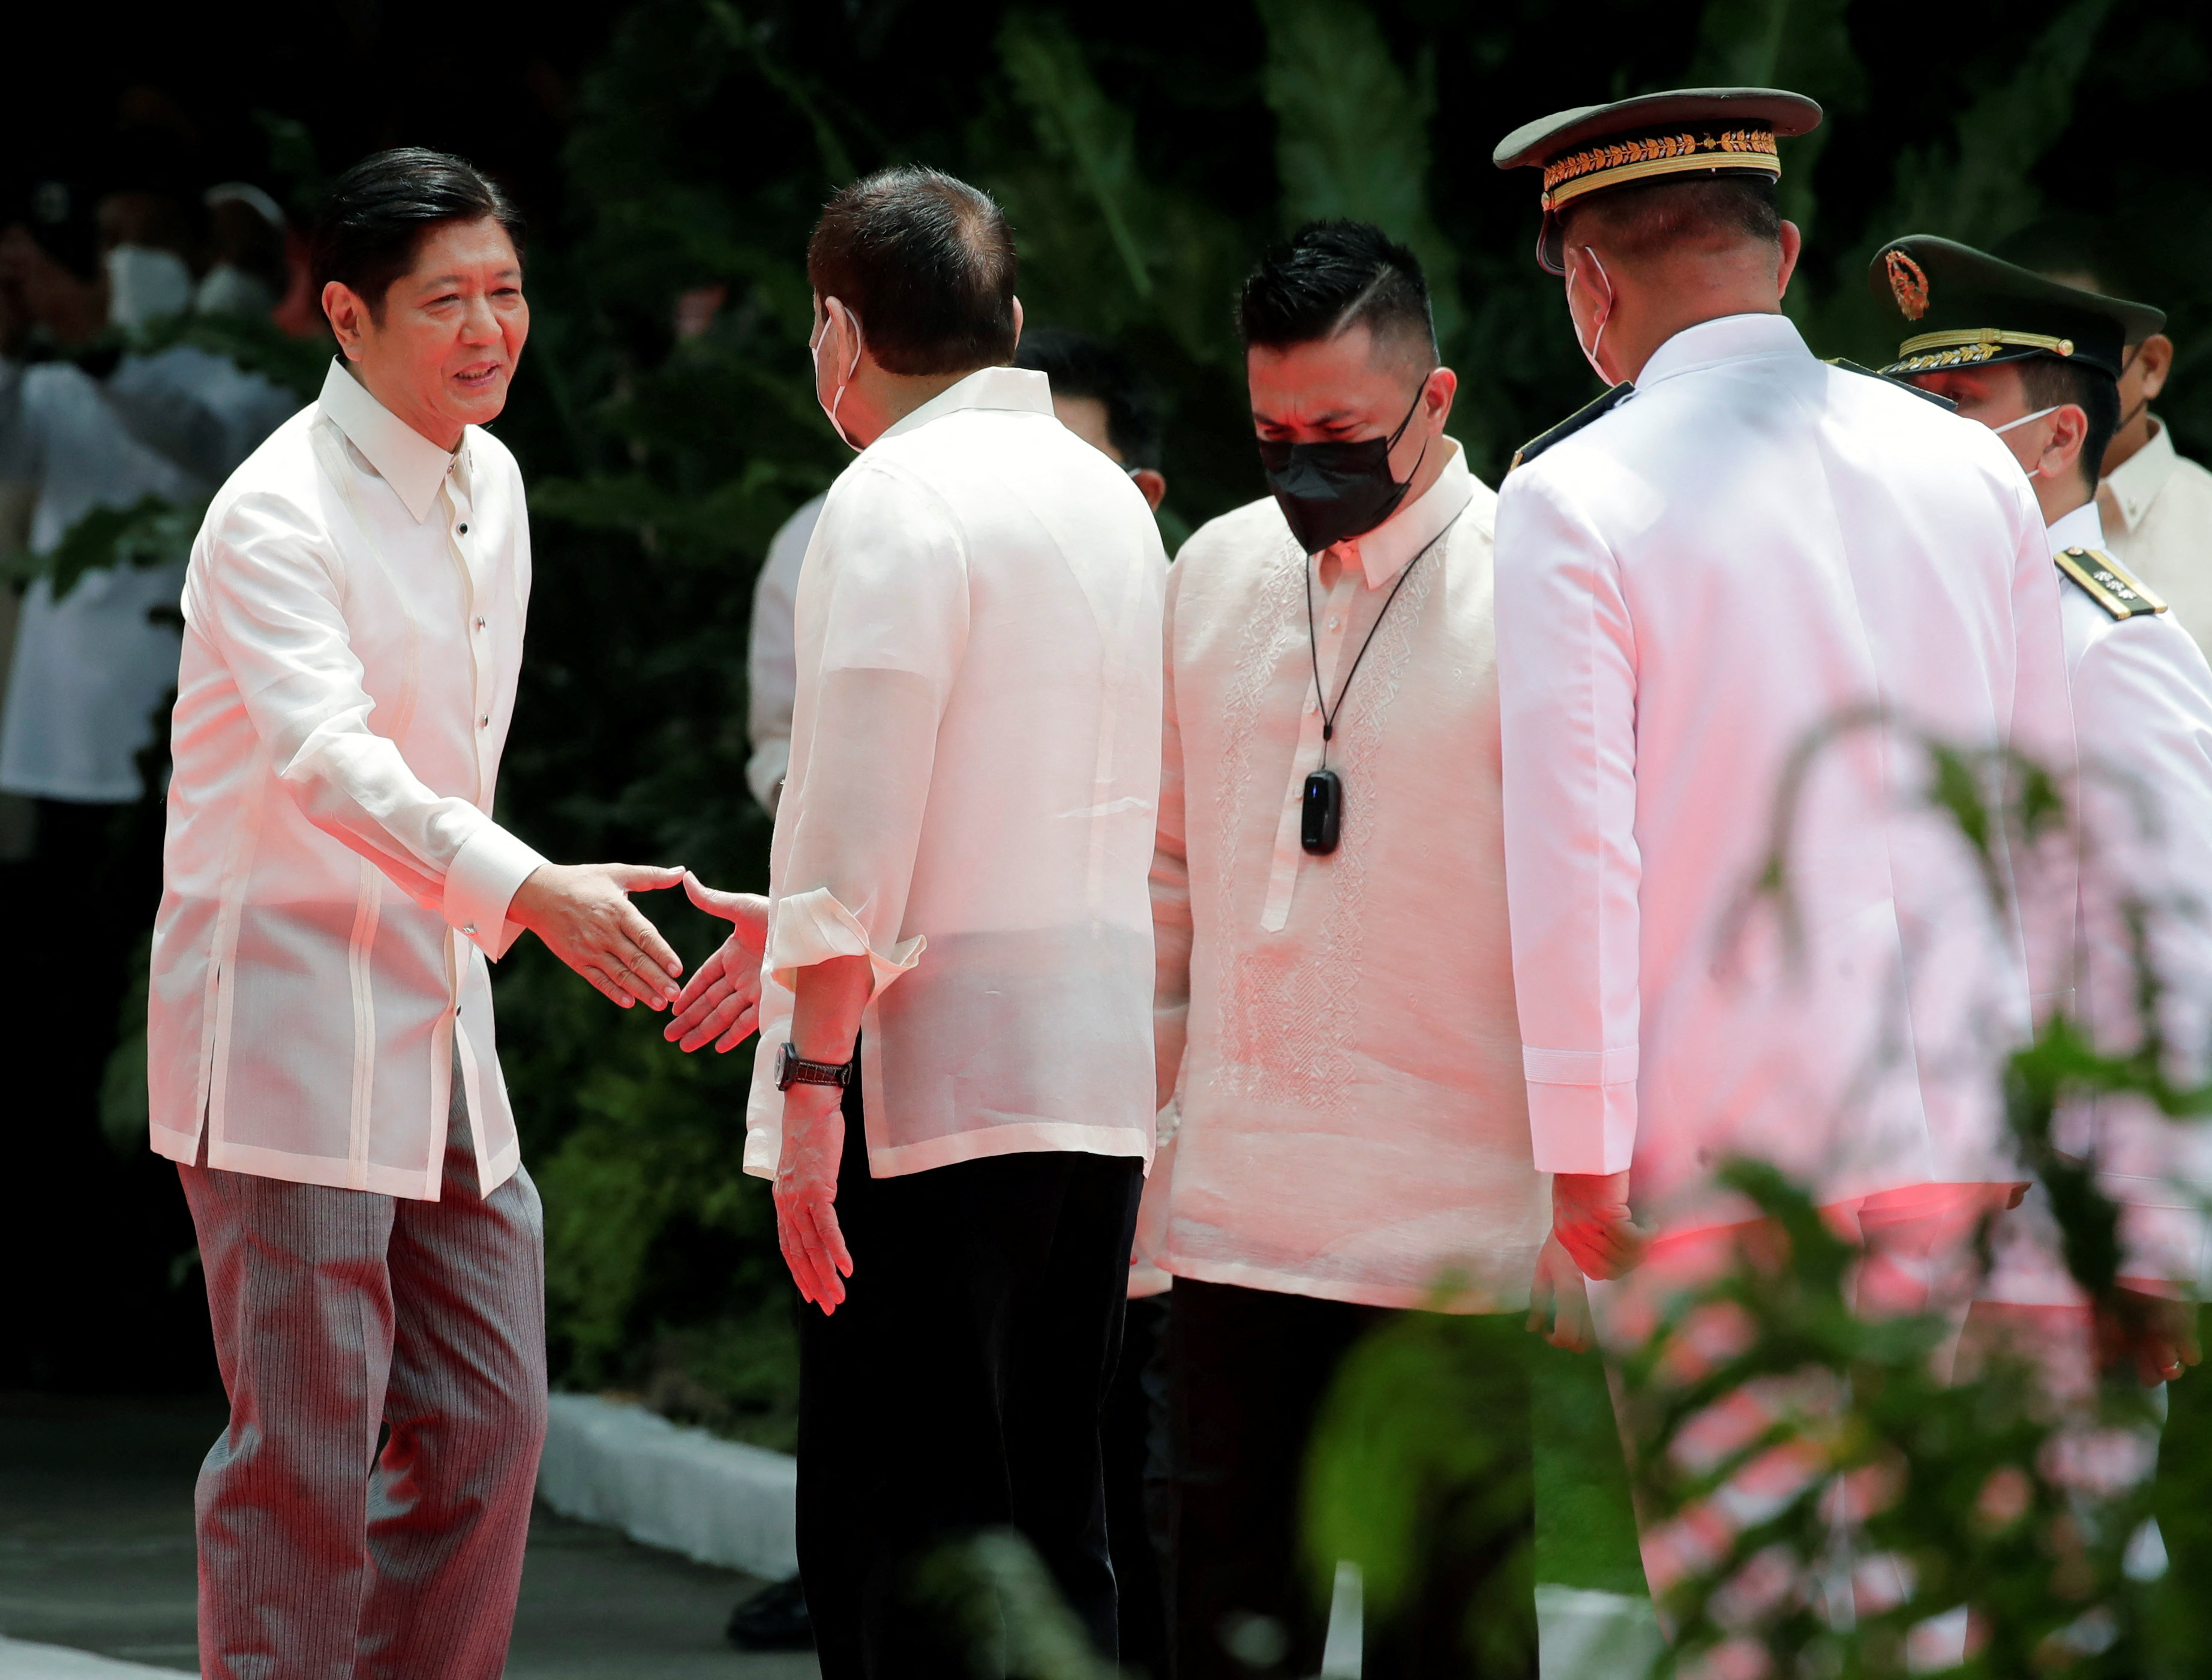 Inauguration of newly-elected Philippine President Ferdinand Marcos Jr.